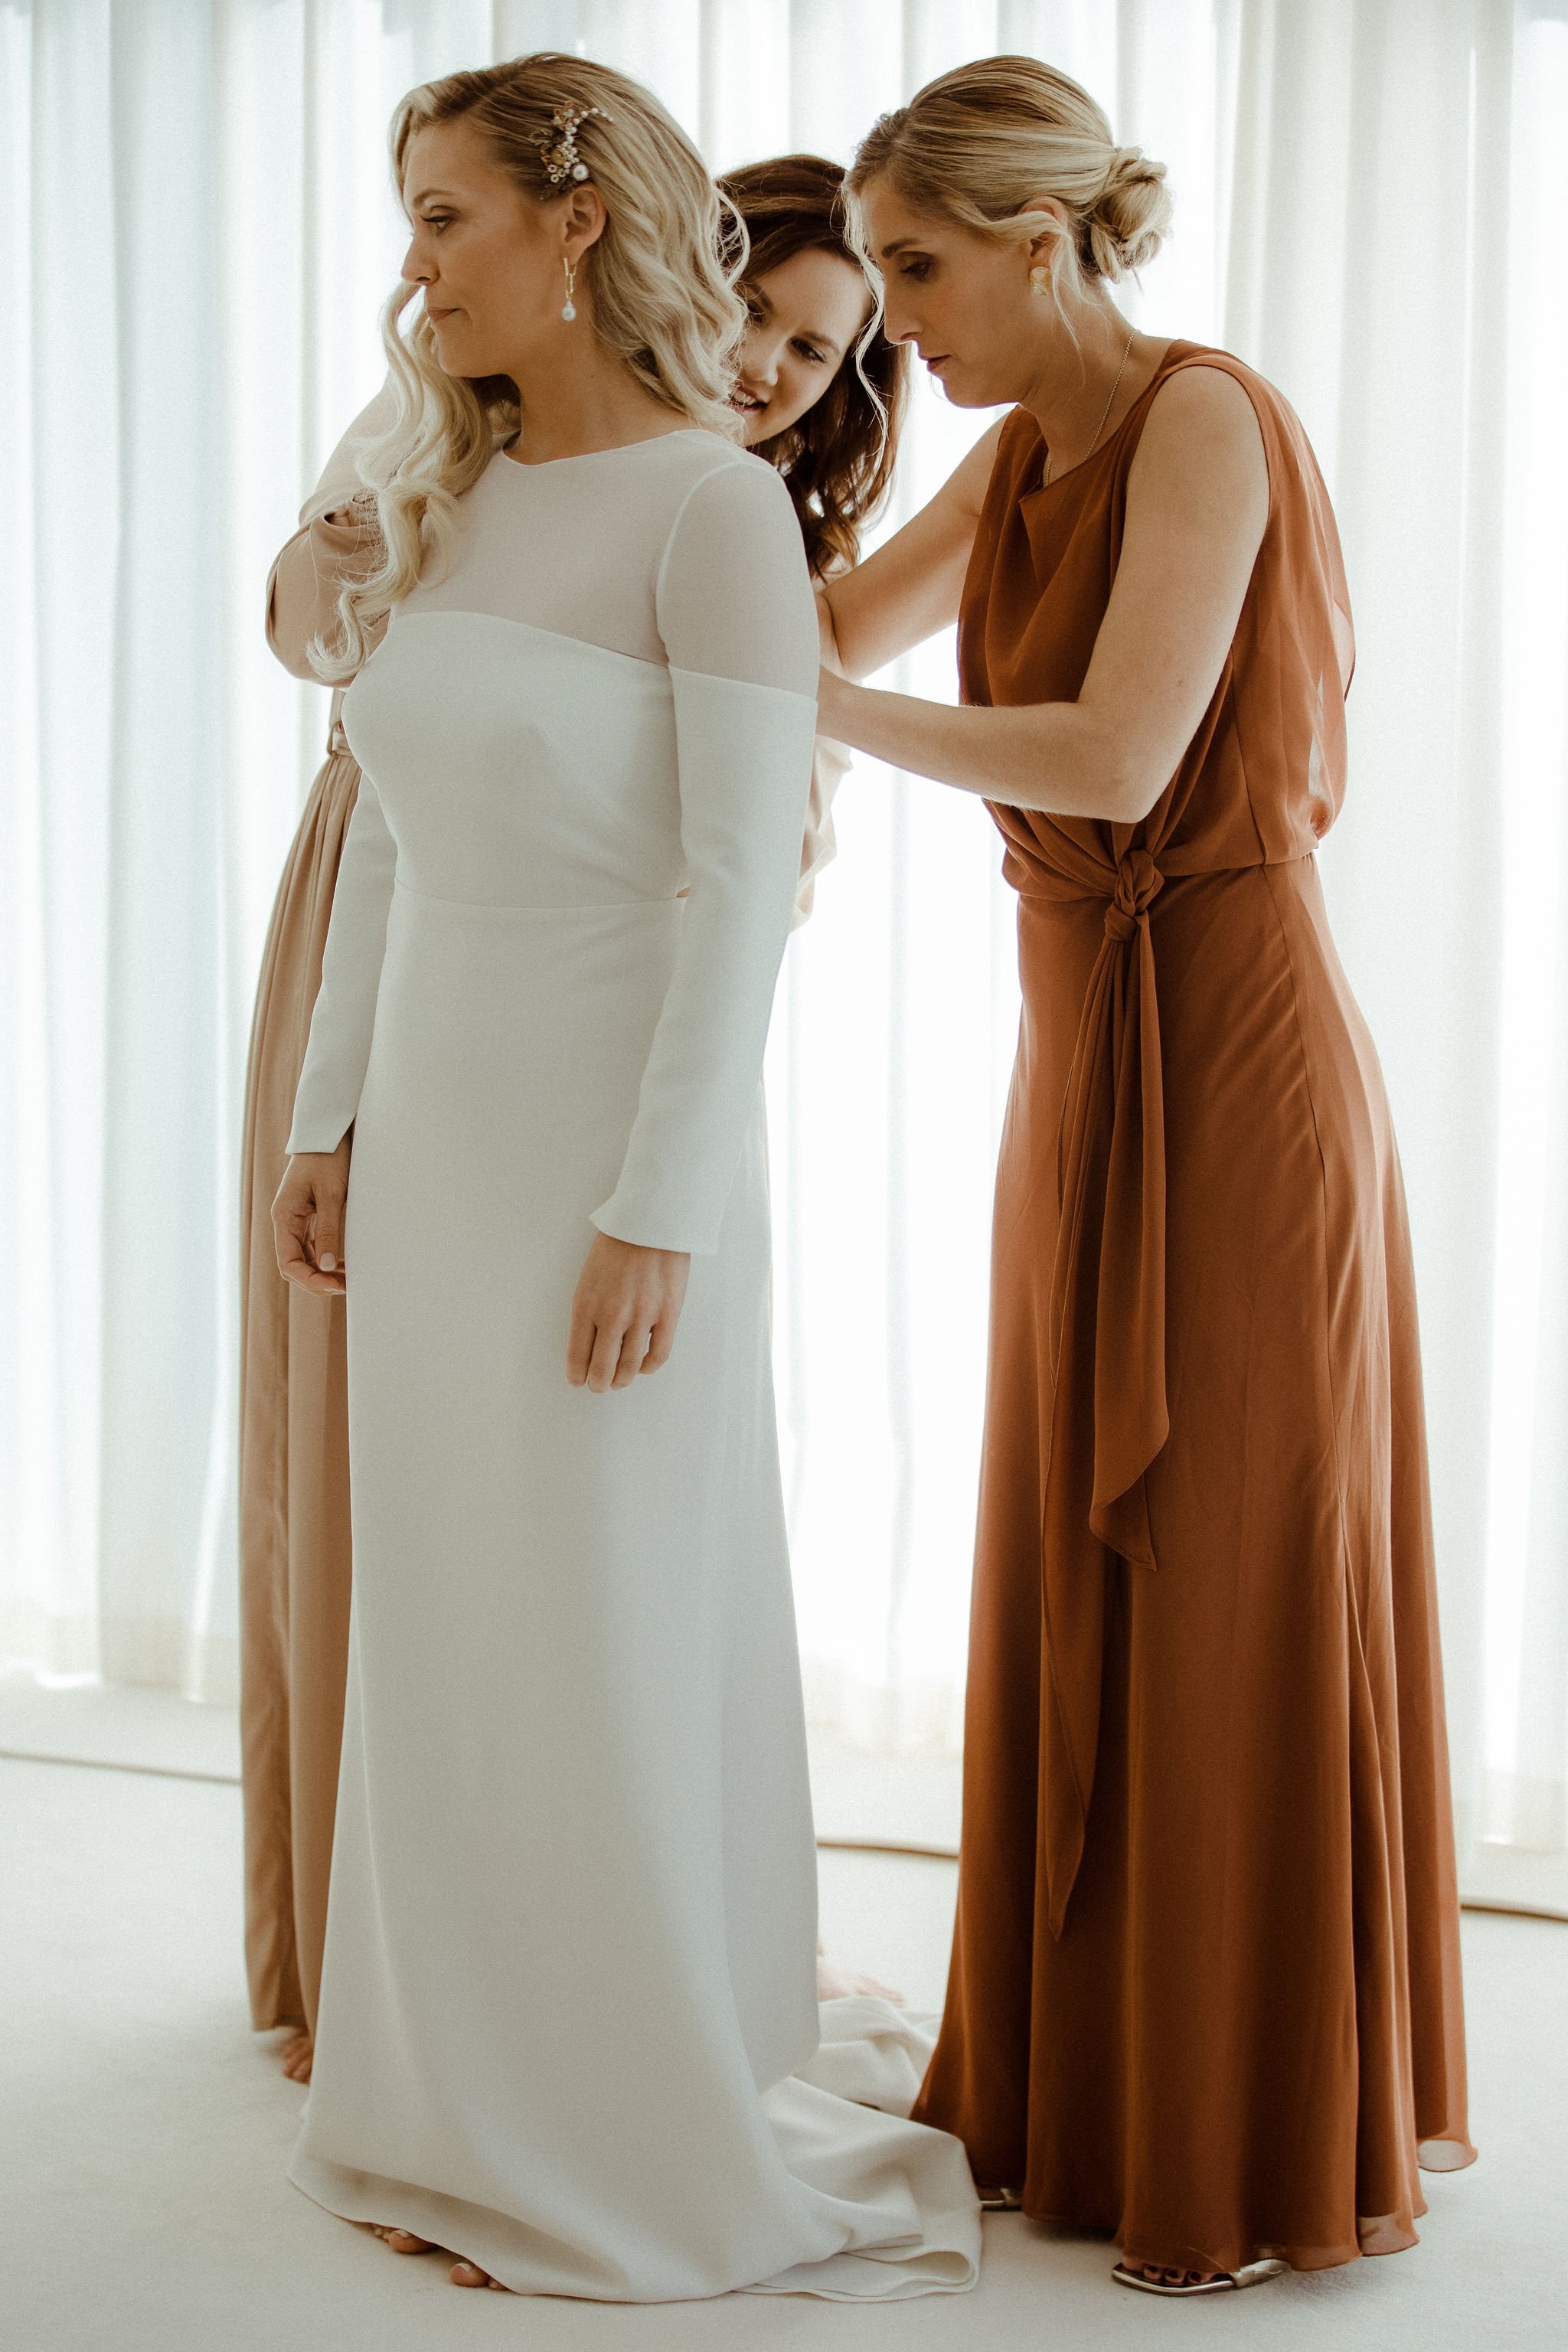 Bridesmaids dressed in terracotta dresses helping contemporary bride into her wedding dress with sleeves for October wedding